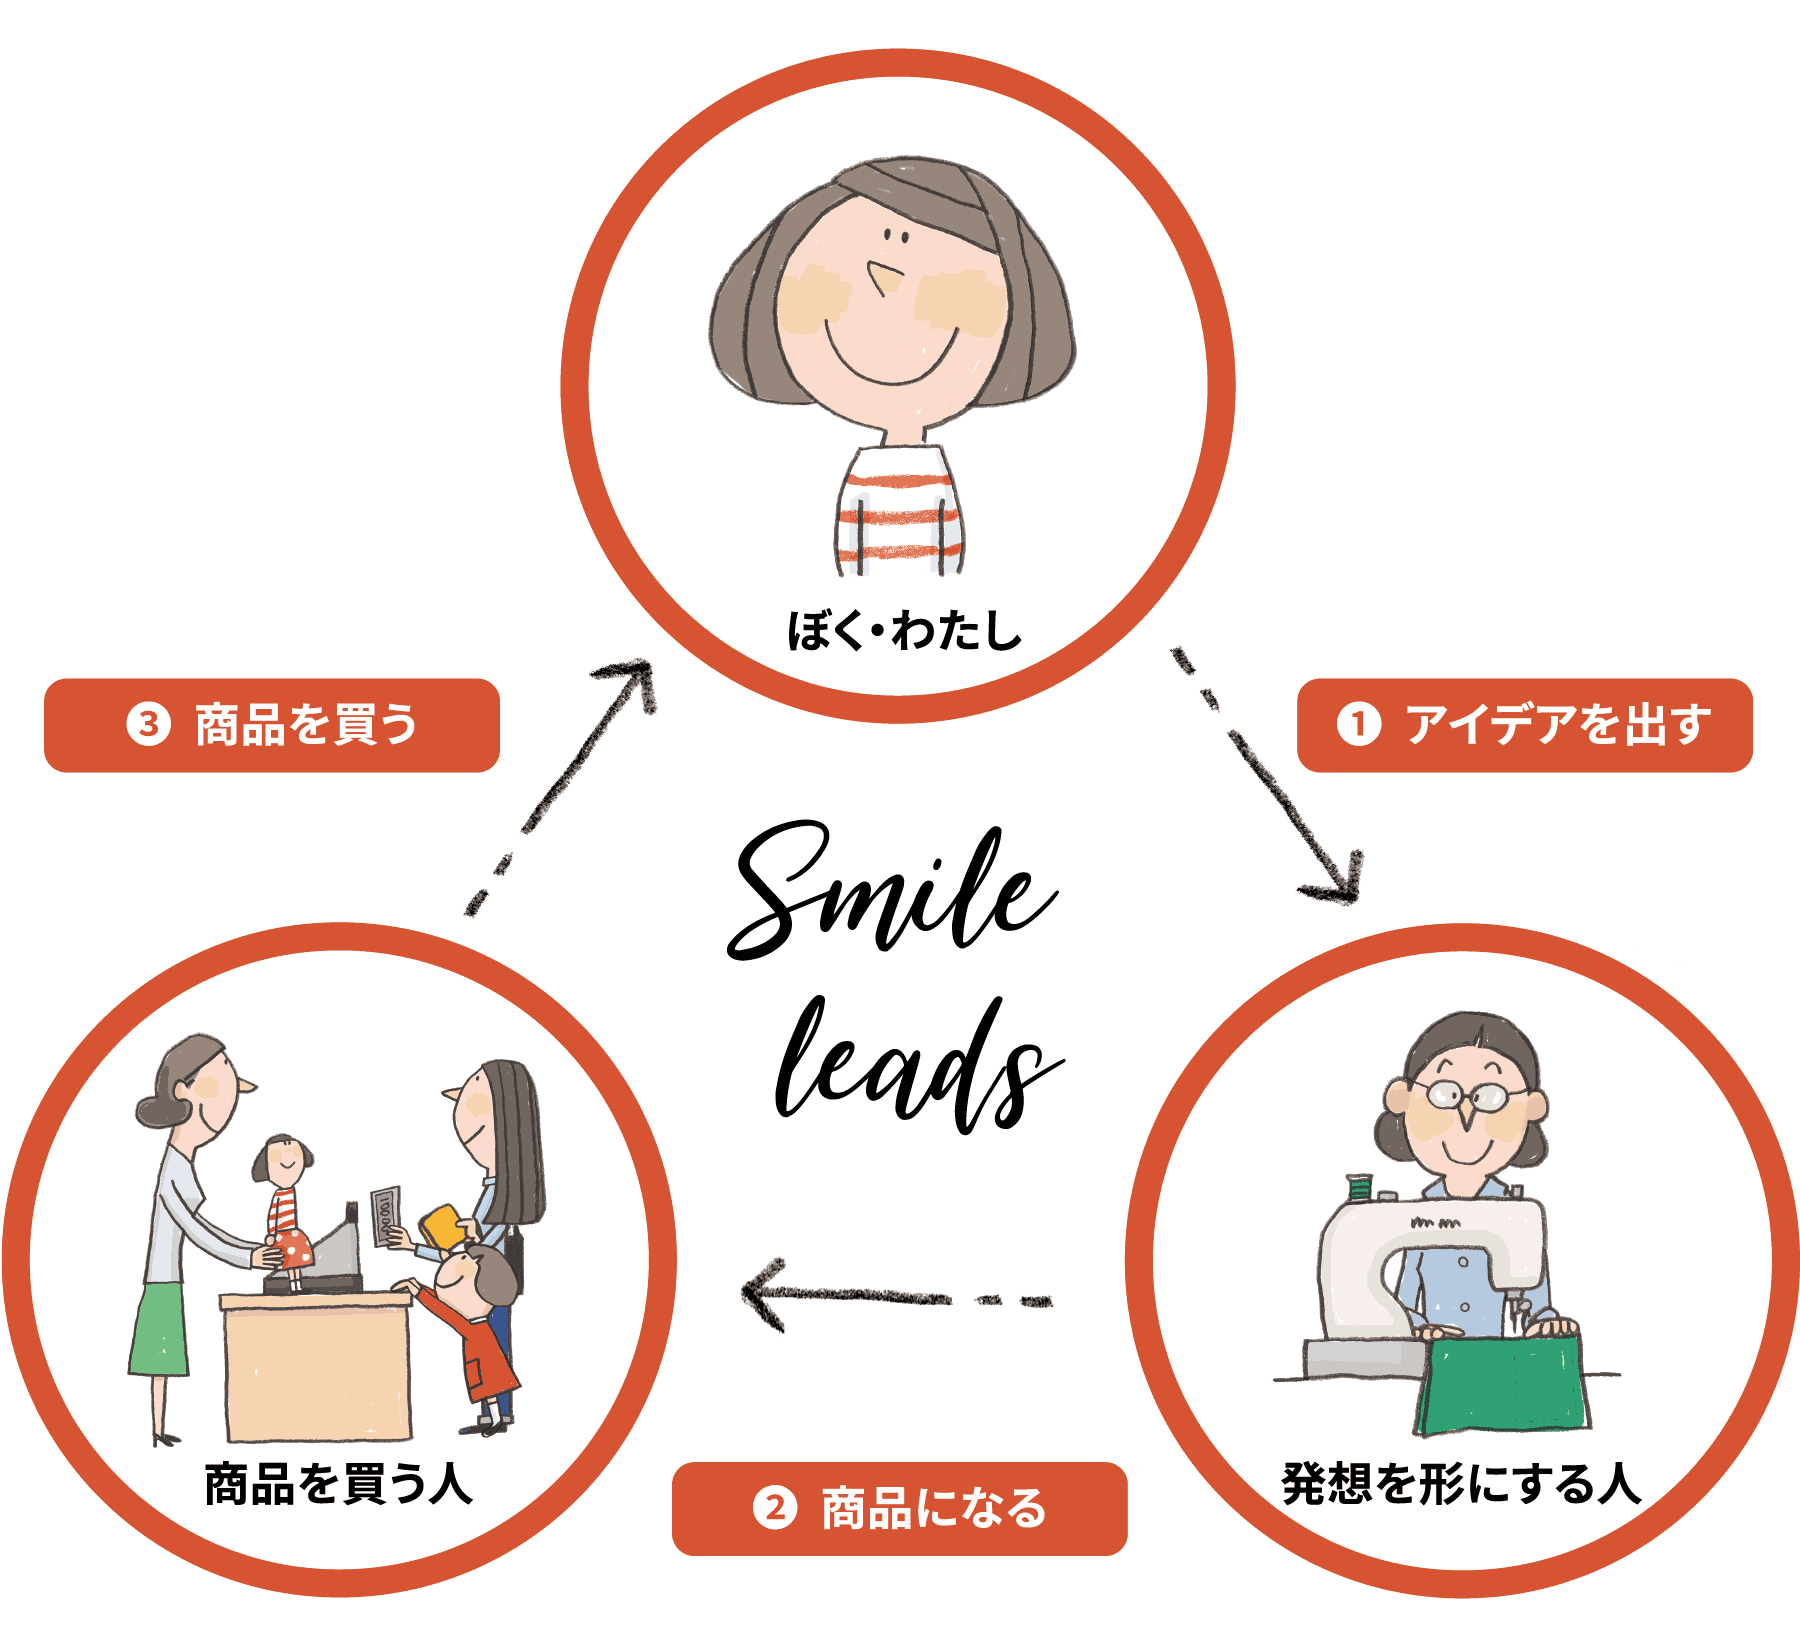 Smile leads